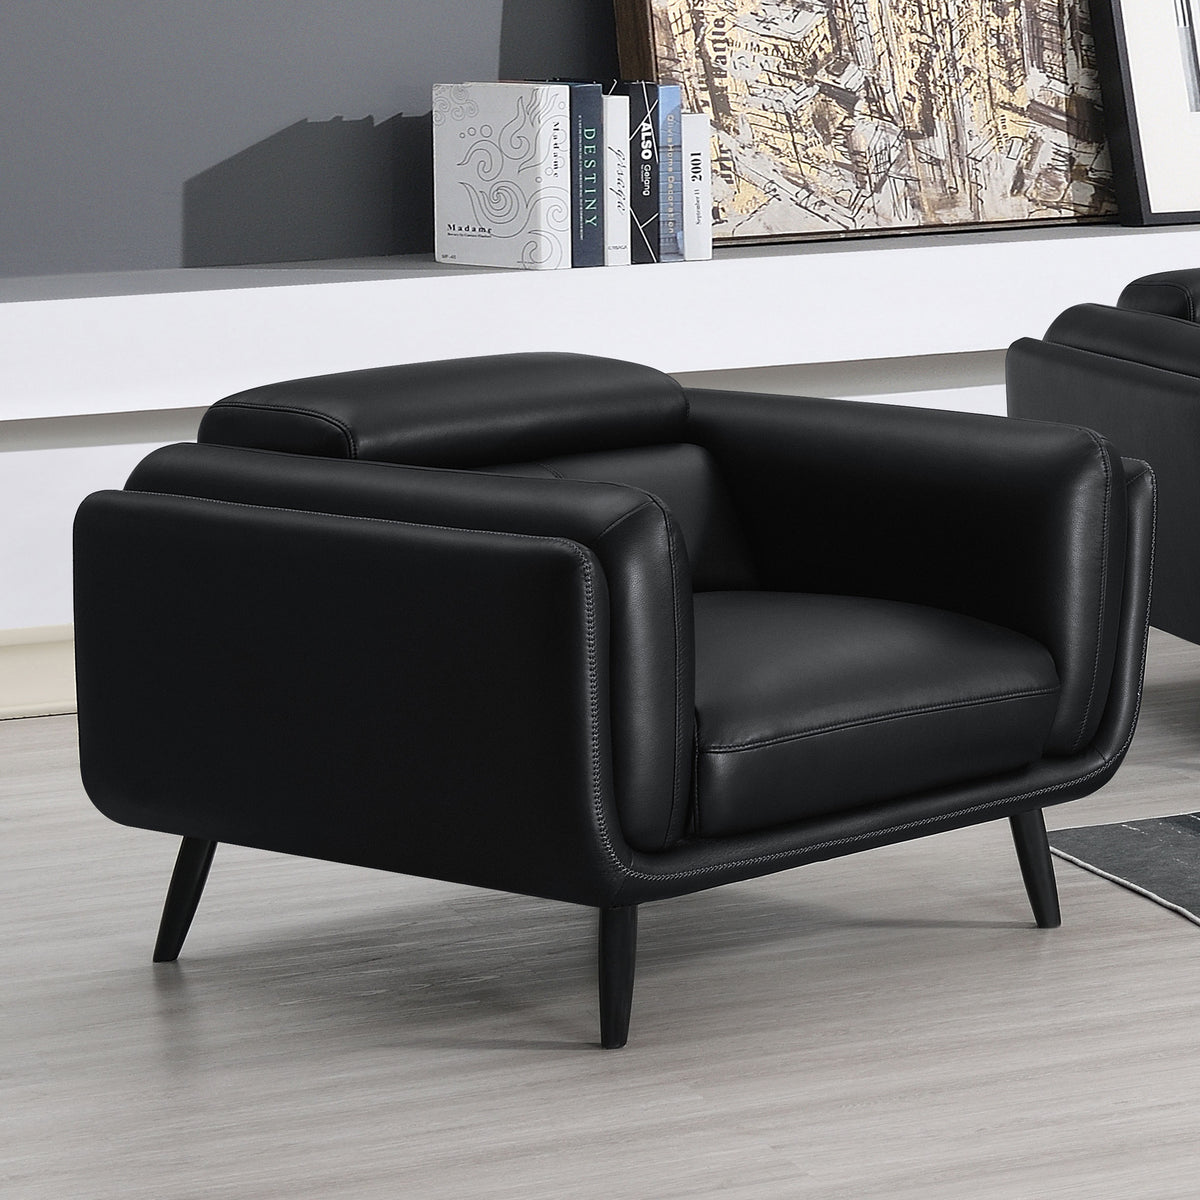 Shania Track Arms Chair with Tapered Legs Black Shania Track Arms Chair with Tapered Legs Black Half Price Furniture